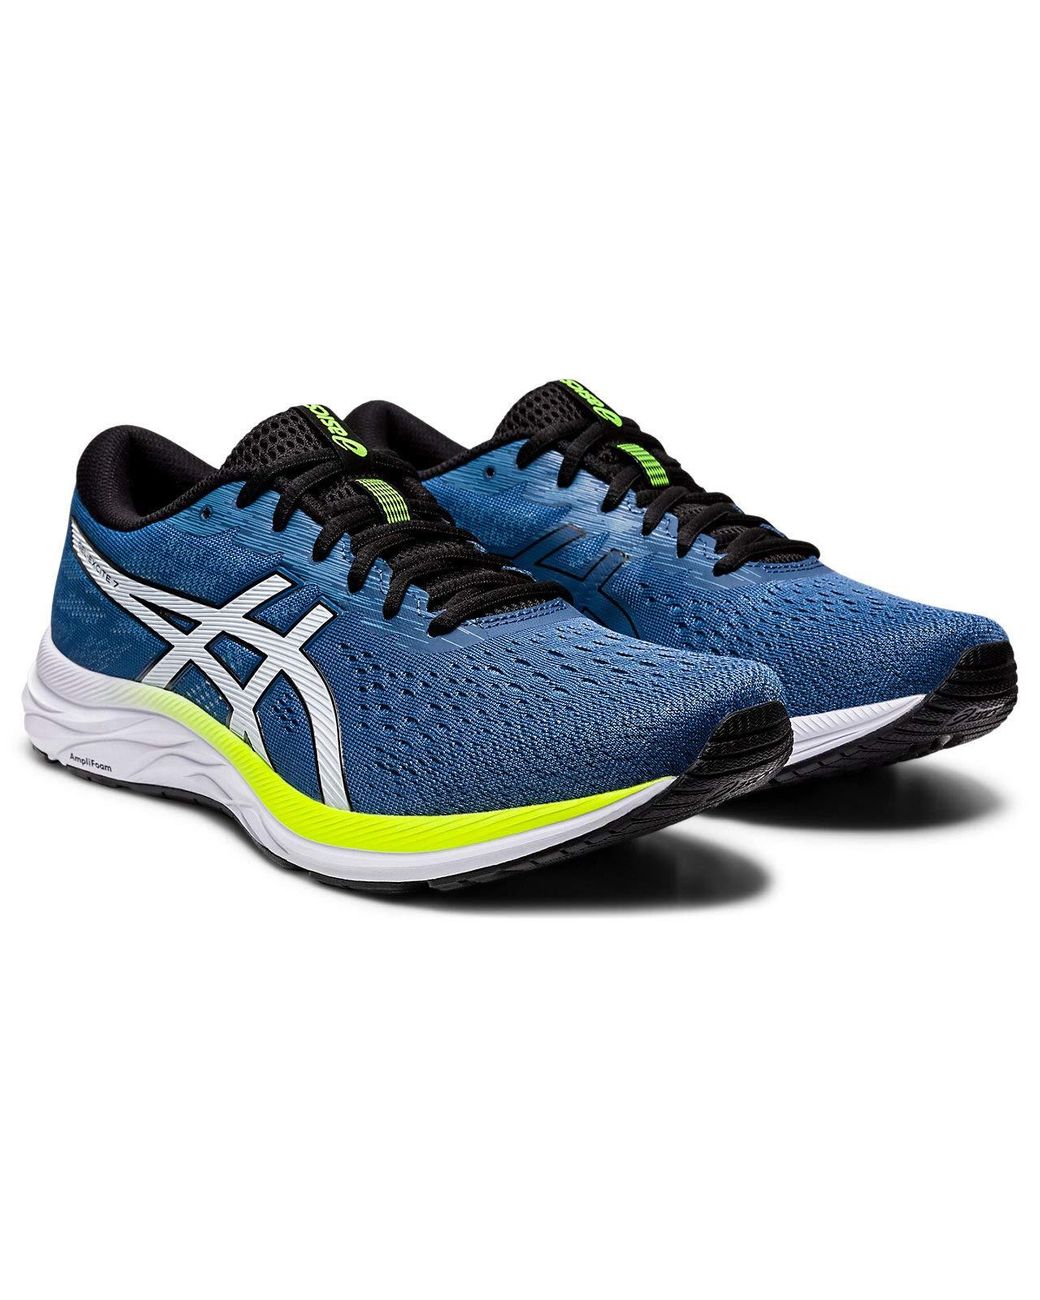 Asics Synthetic Gel-excite 7 in Navy (Blue) for Men - Lyst